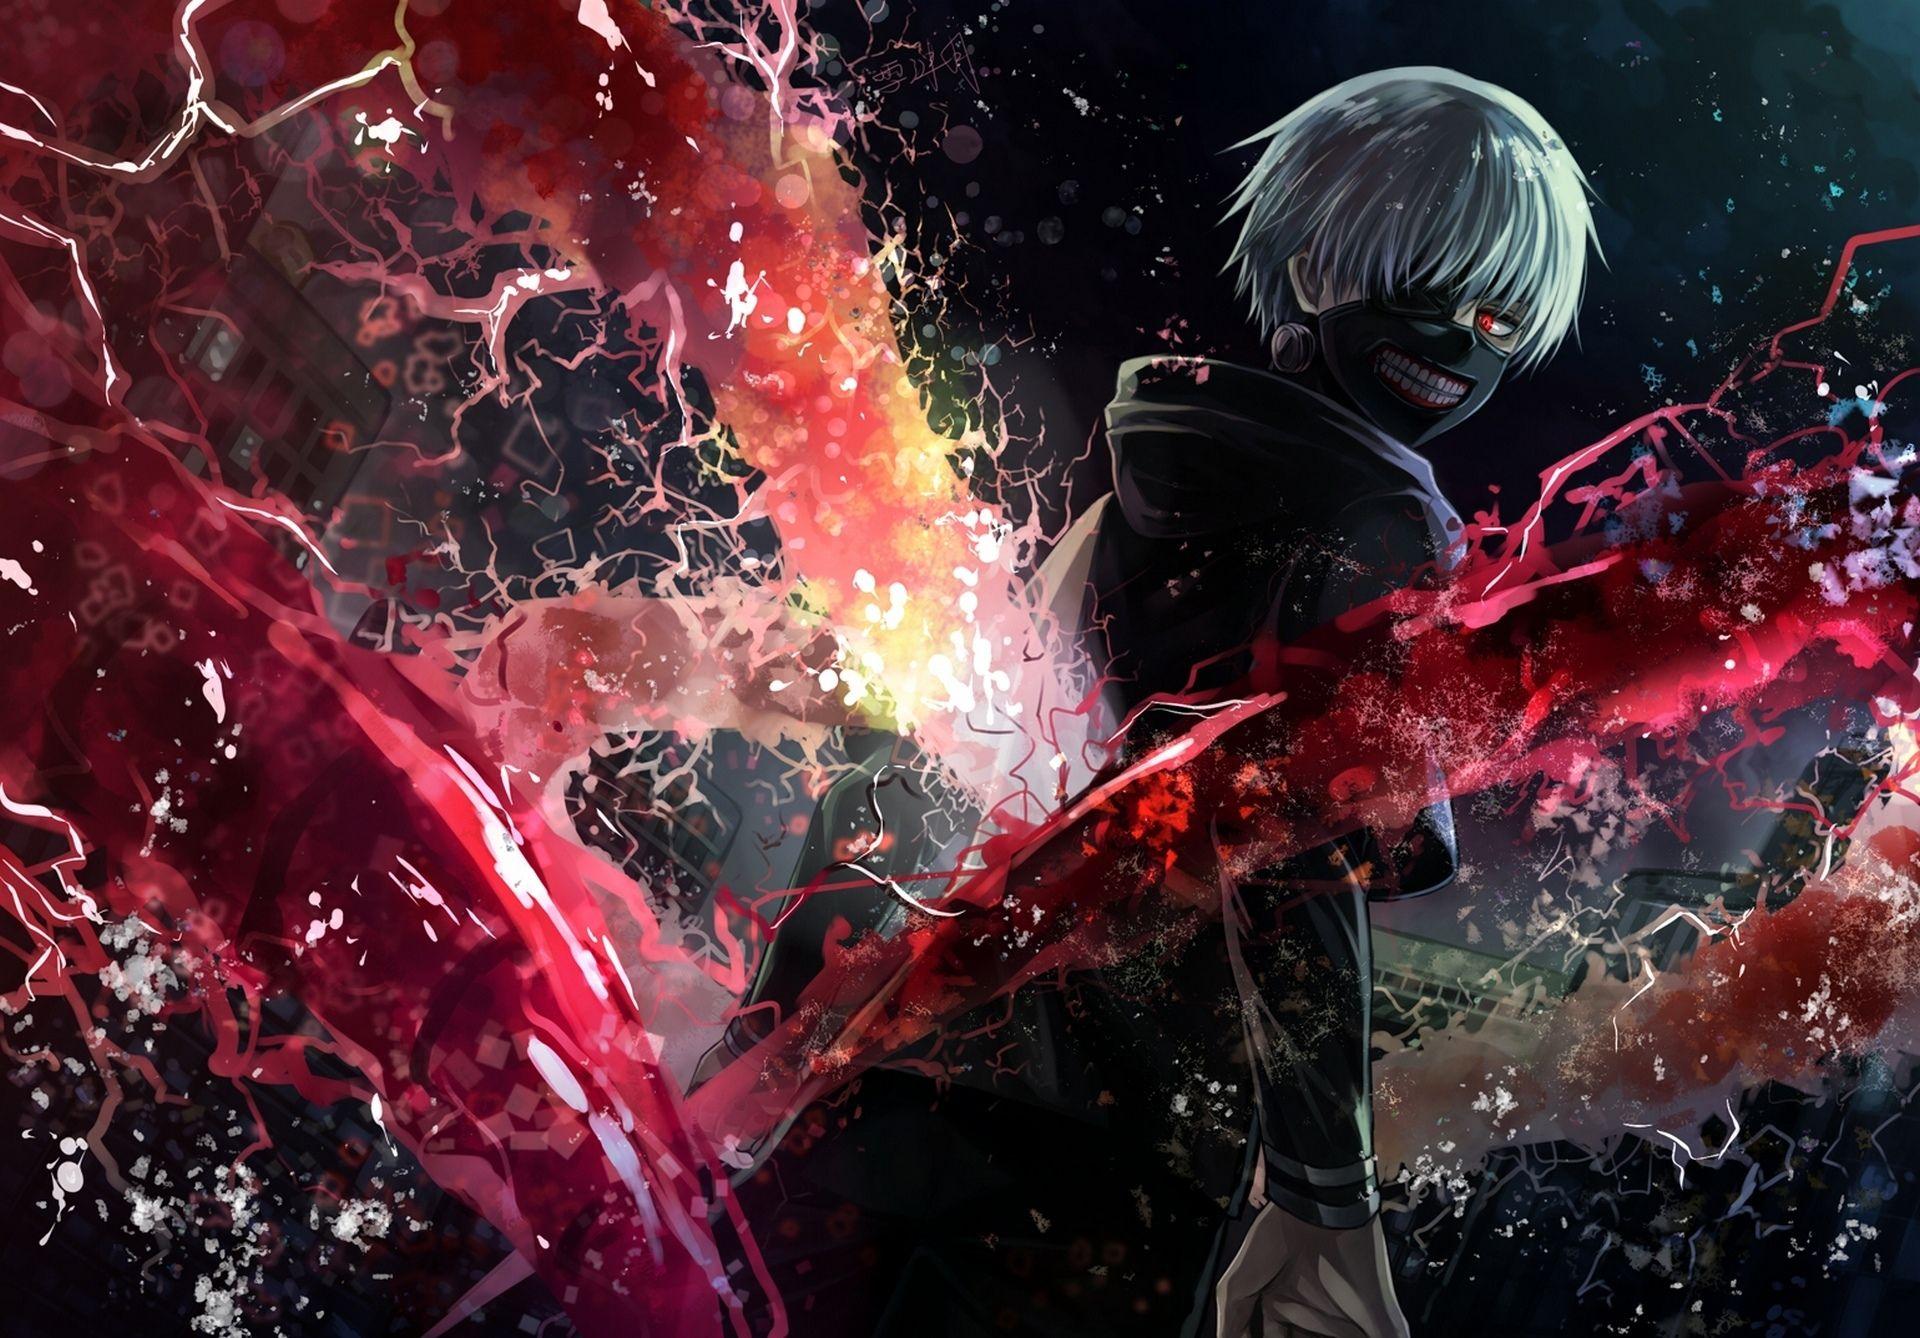 Tokyo Ghoul Anime HD Wallpapers Free Download